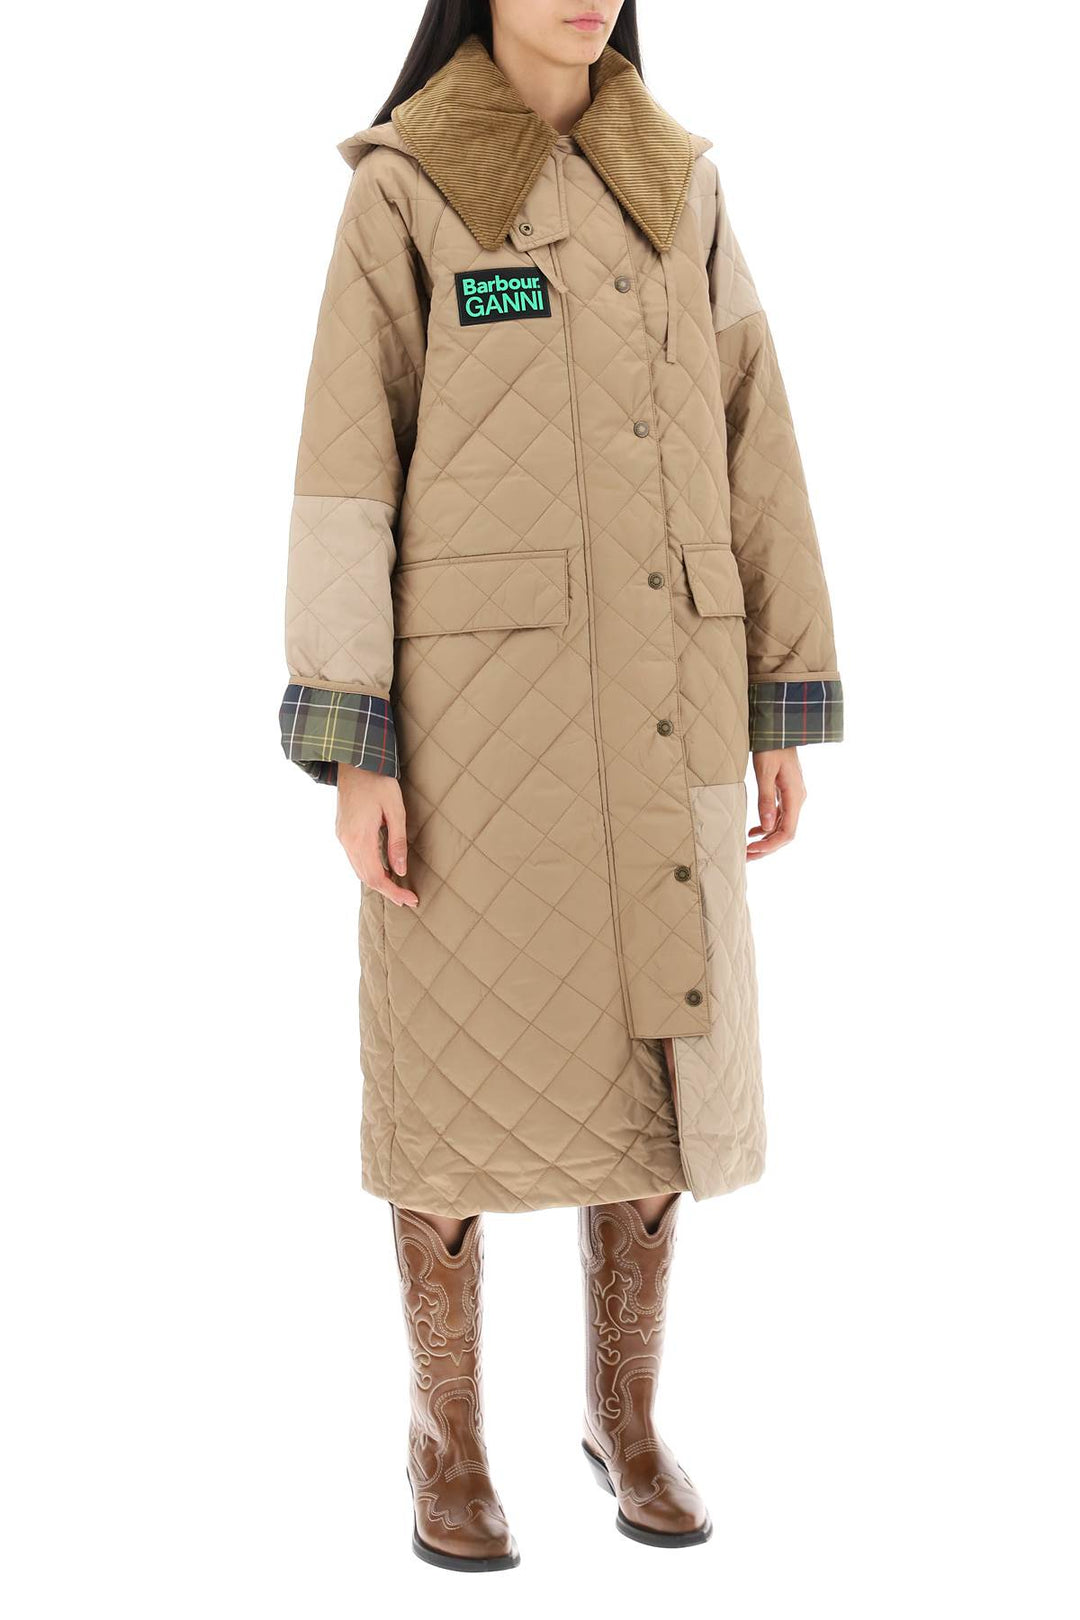 Trench Trapuntato Burghley - Barbour X Ganni - Donna